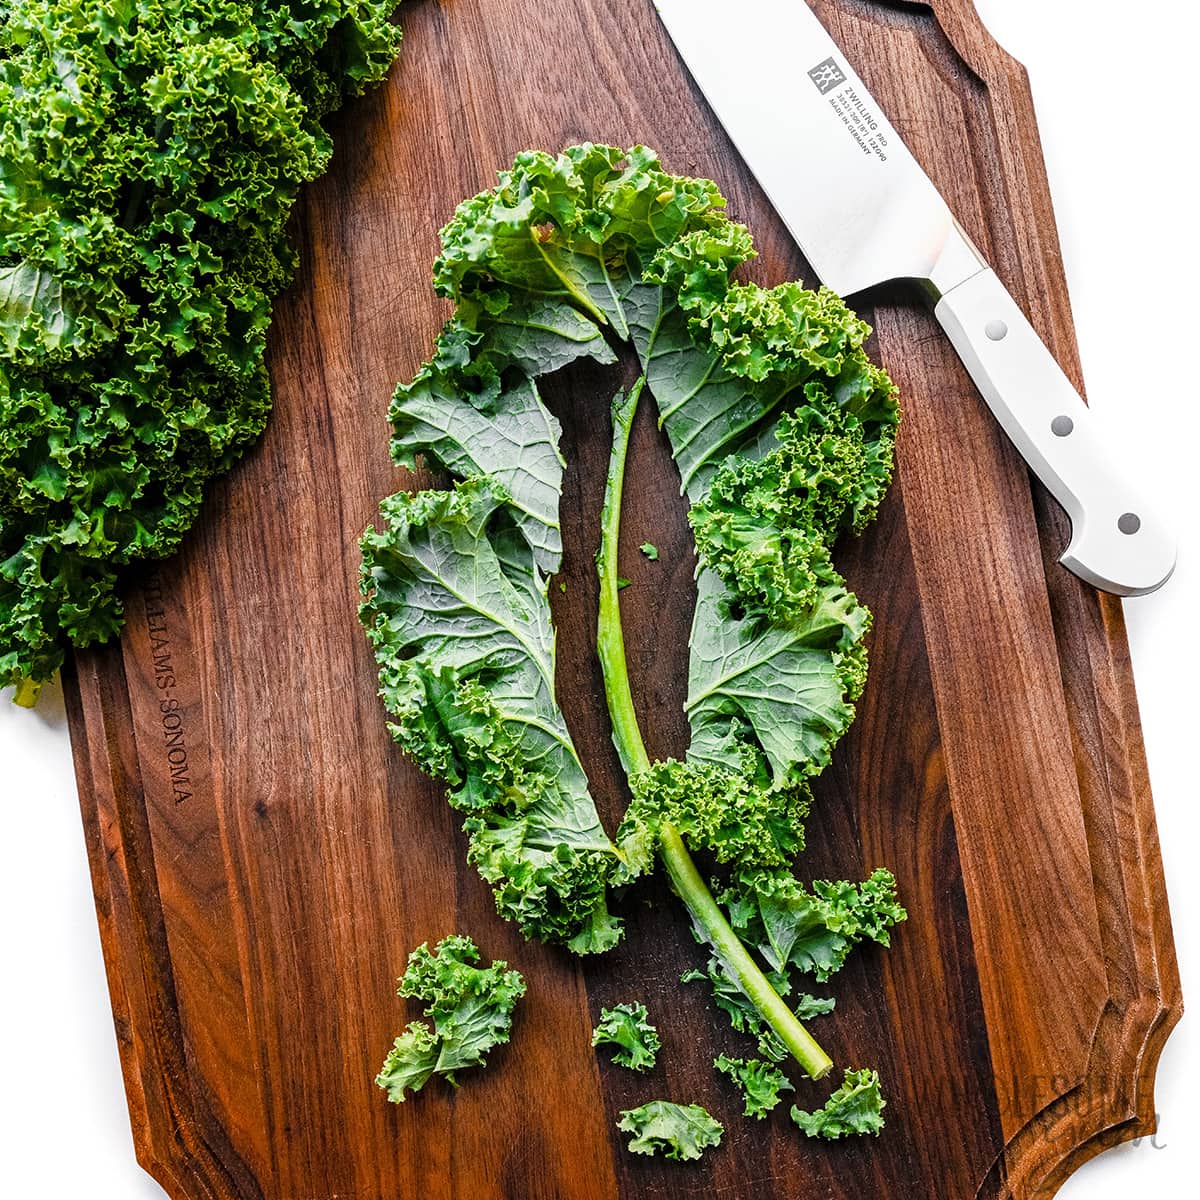 Washed kale on cutting board. 